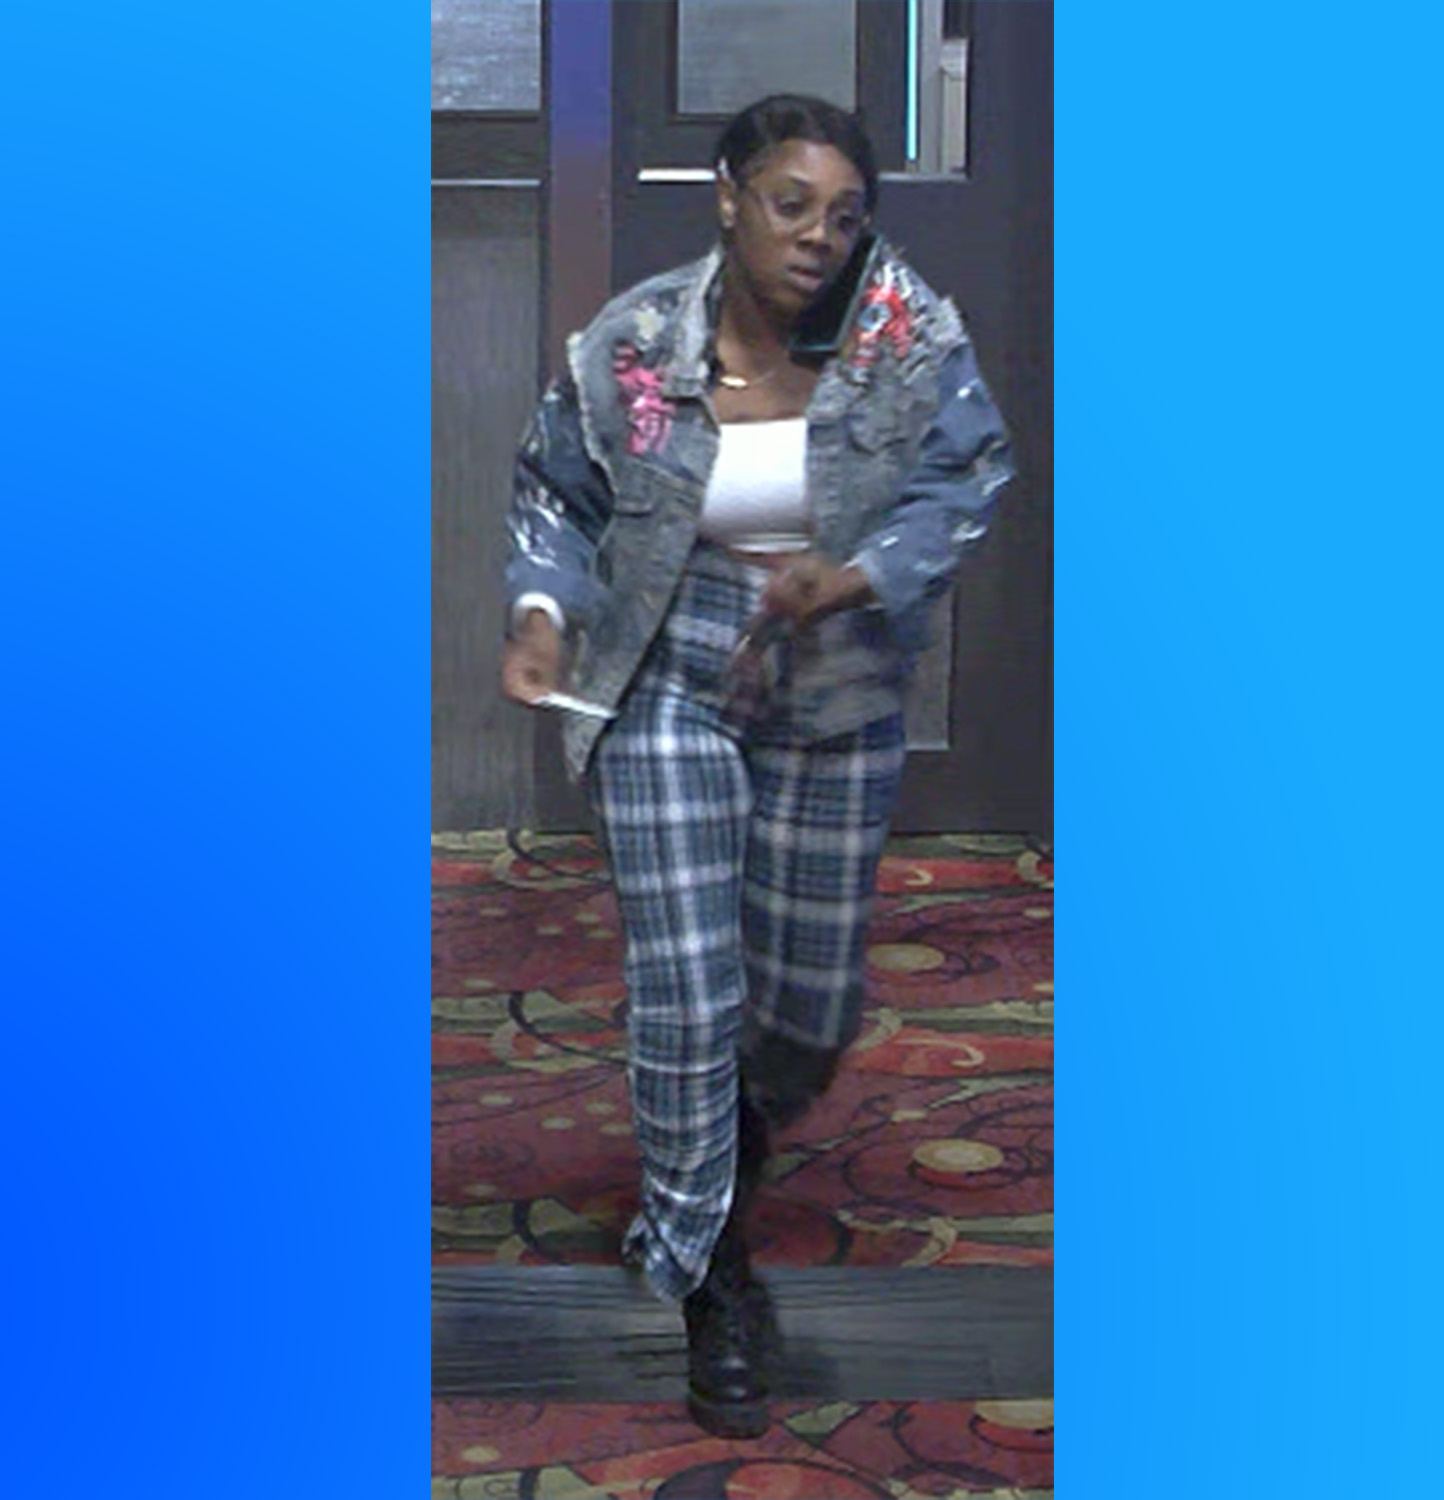 Person sought for information in East Birmingham robbery investigation